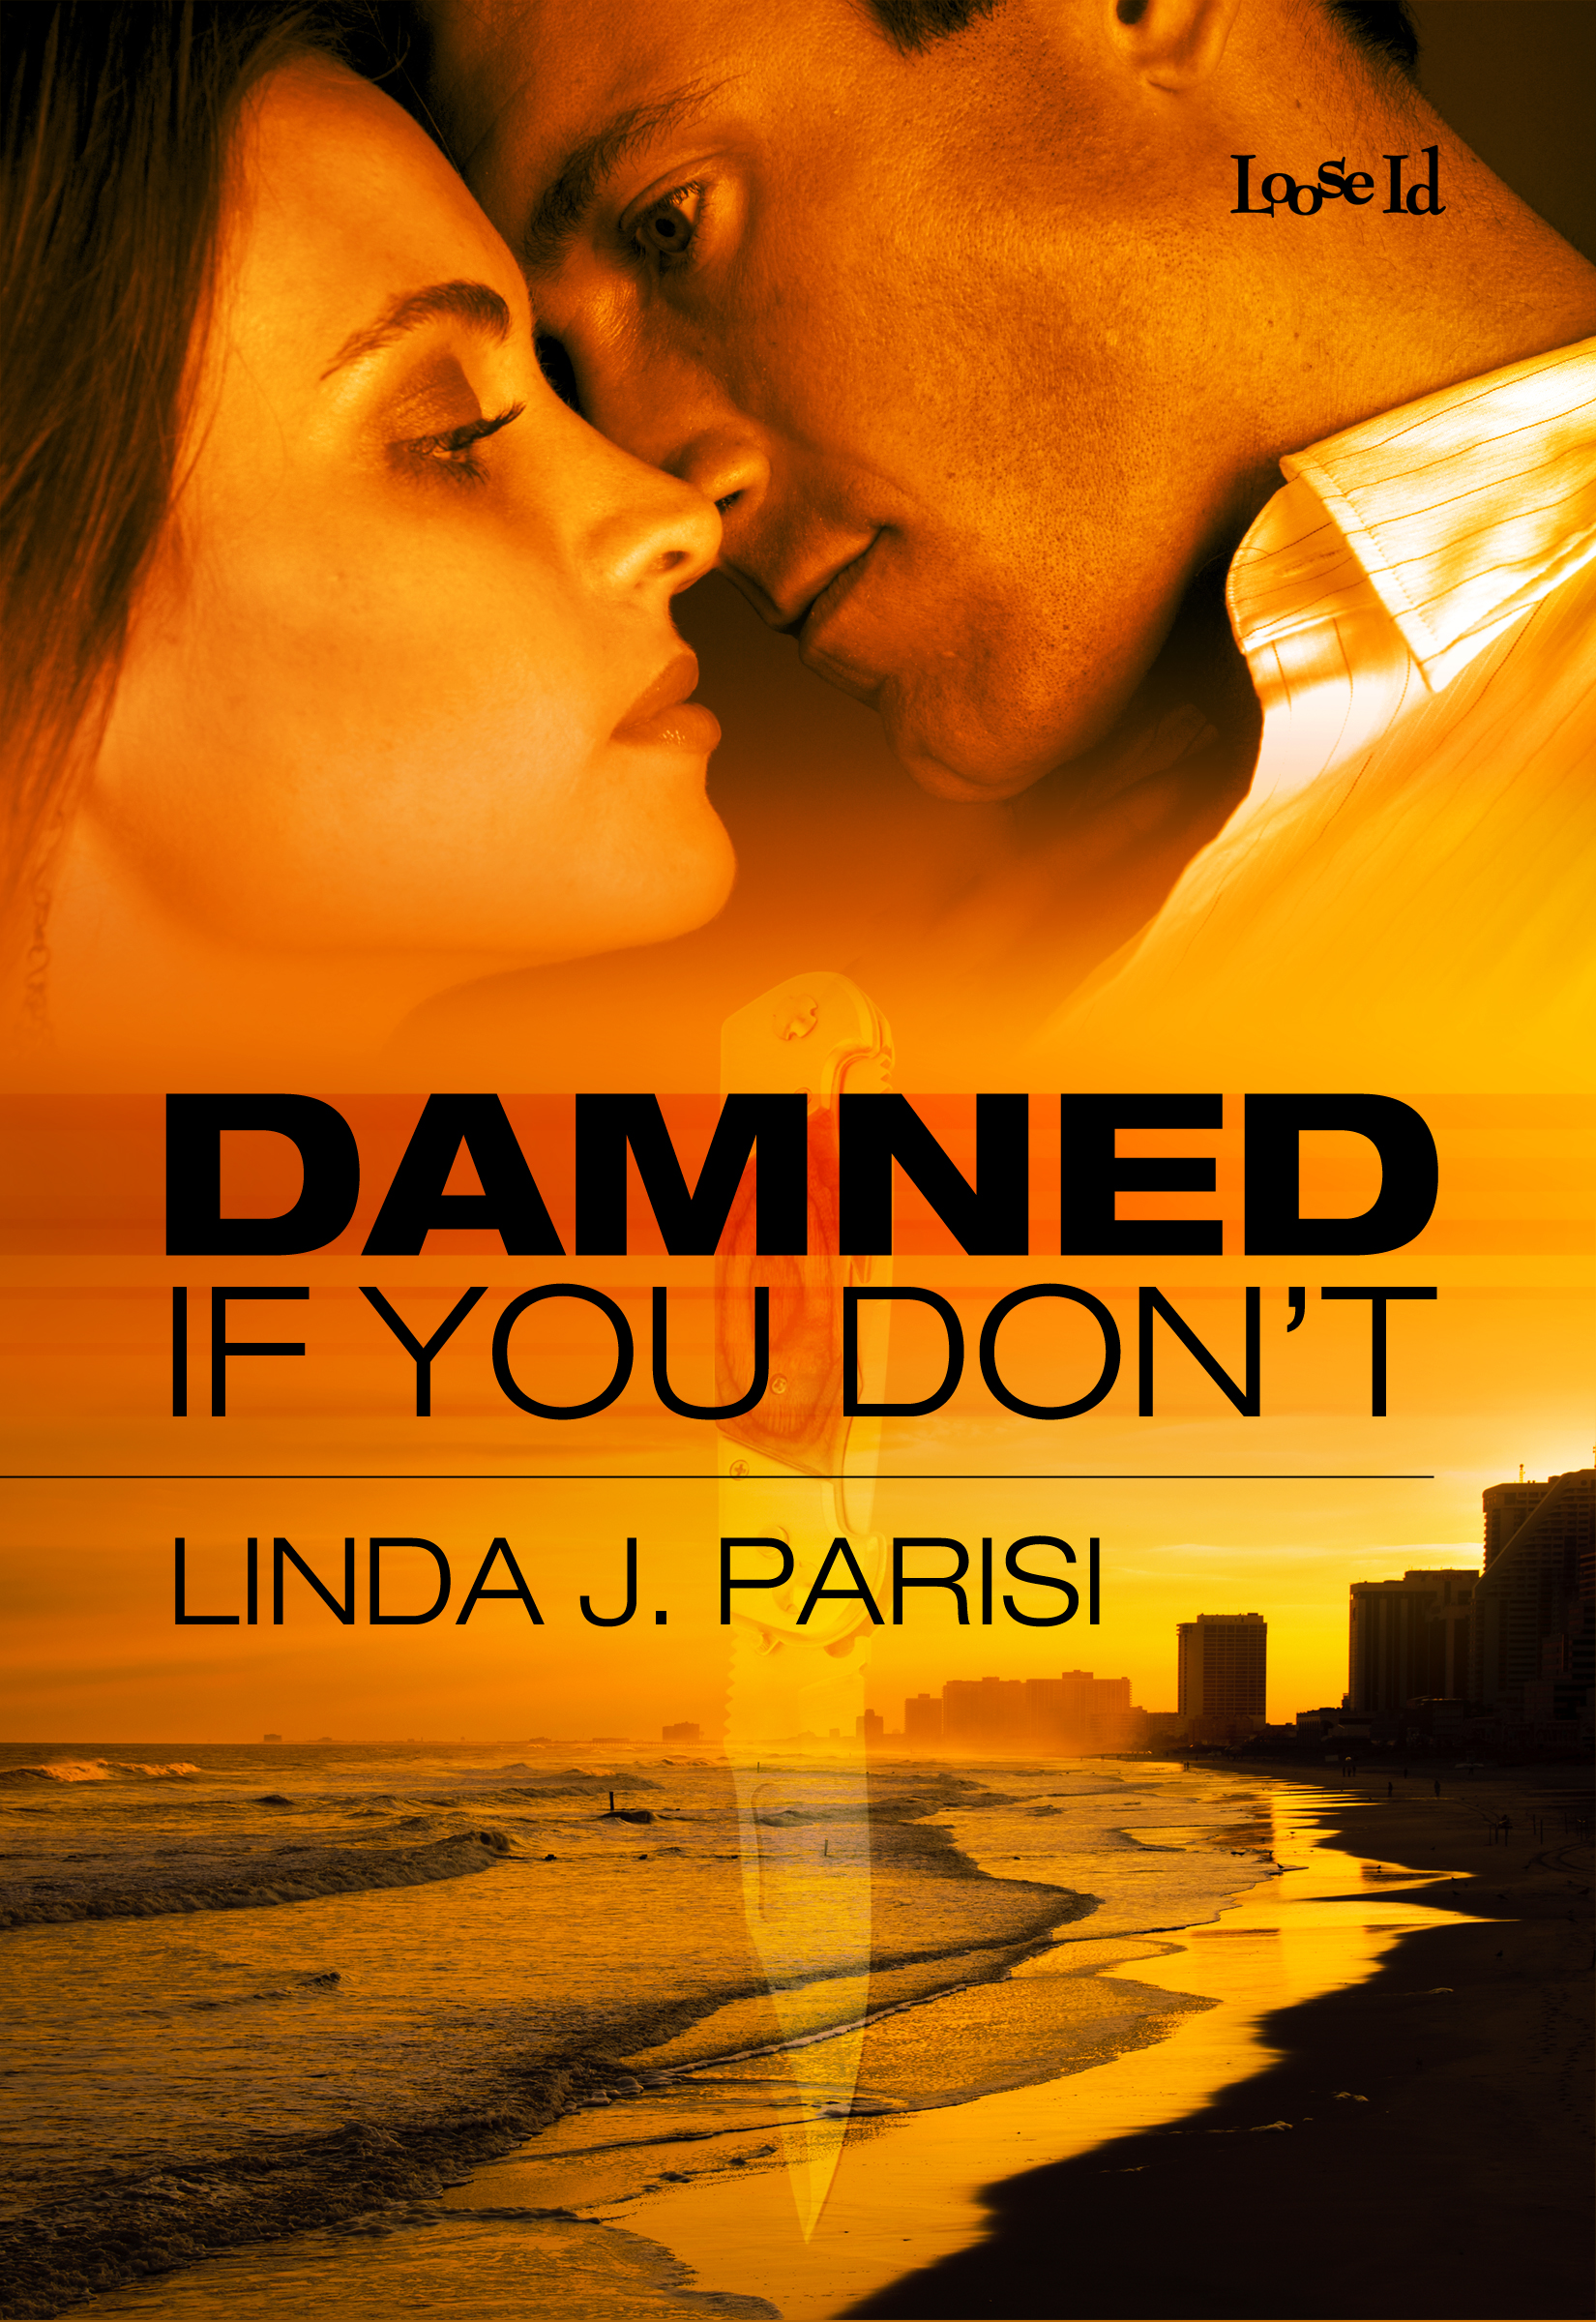 new-release-spotlight-and-giveaway-damned-if-you-don-t-by-linda-j-parisi